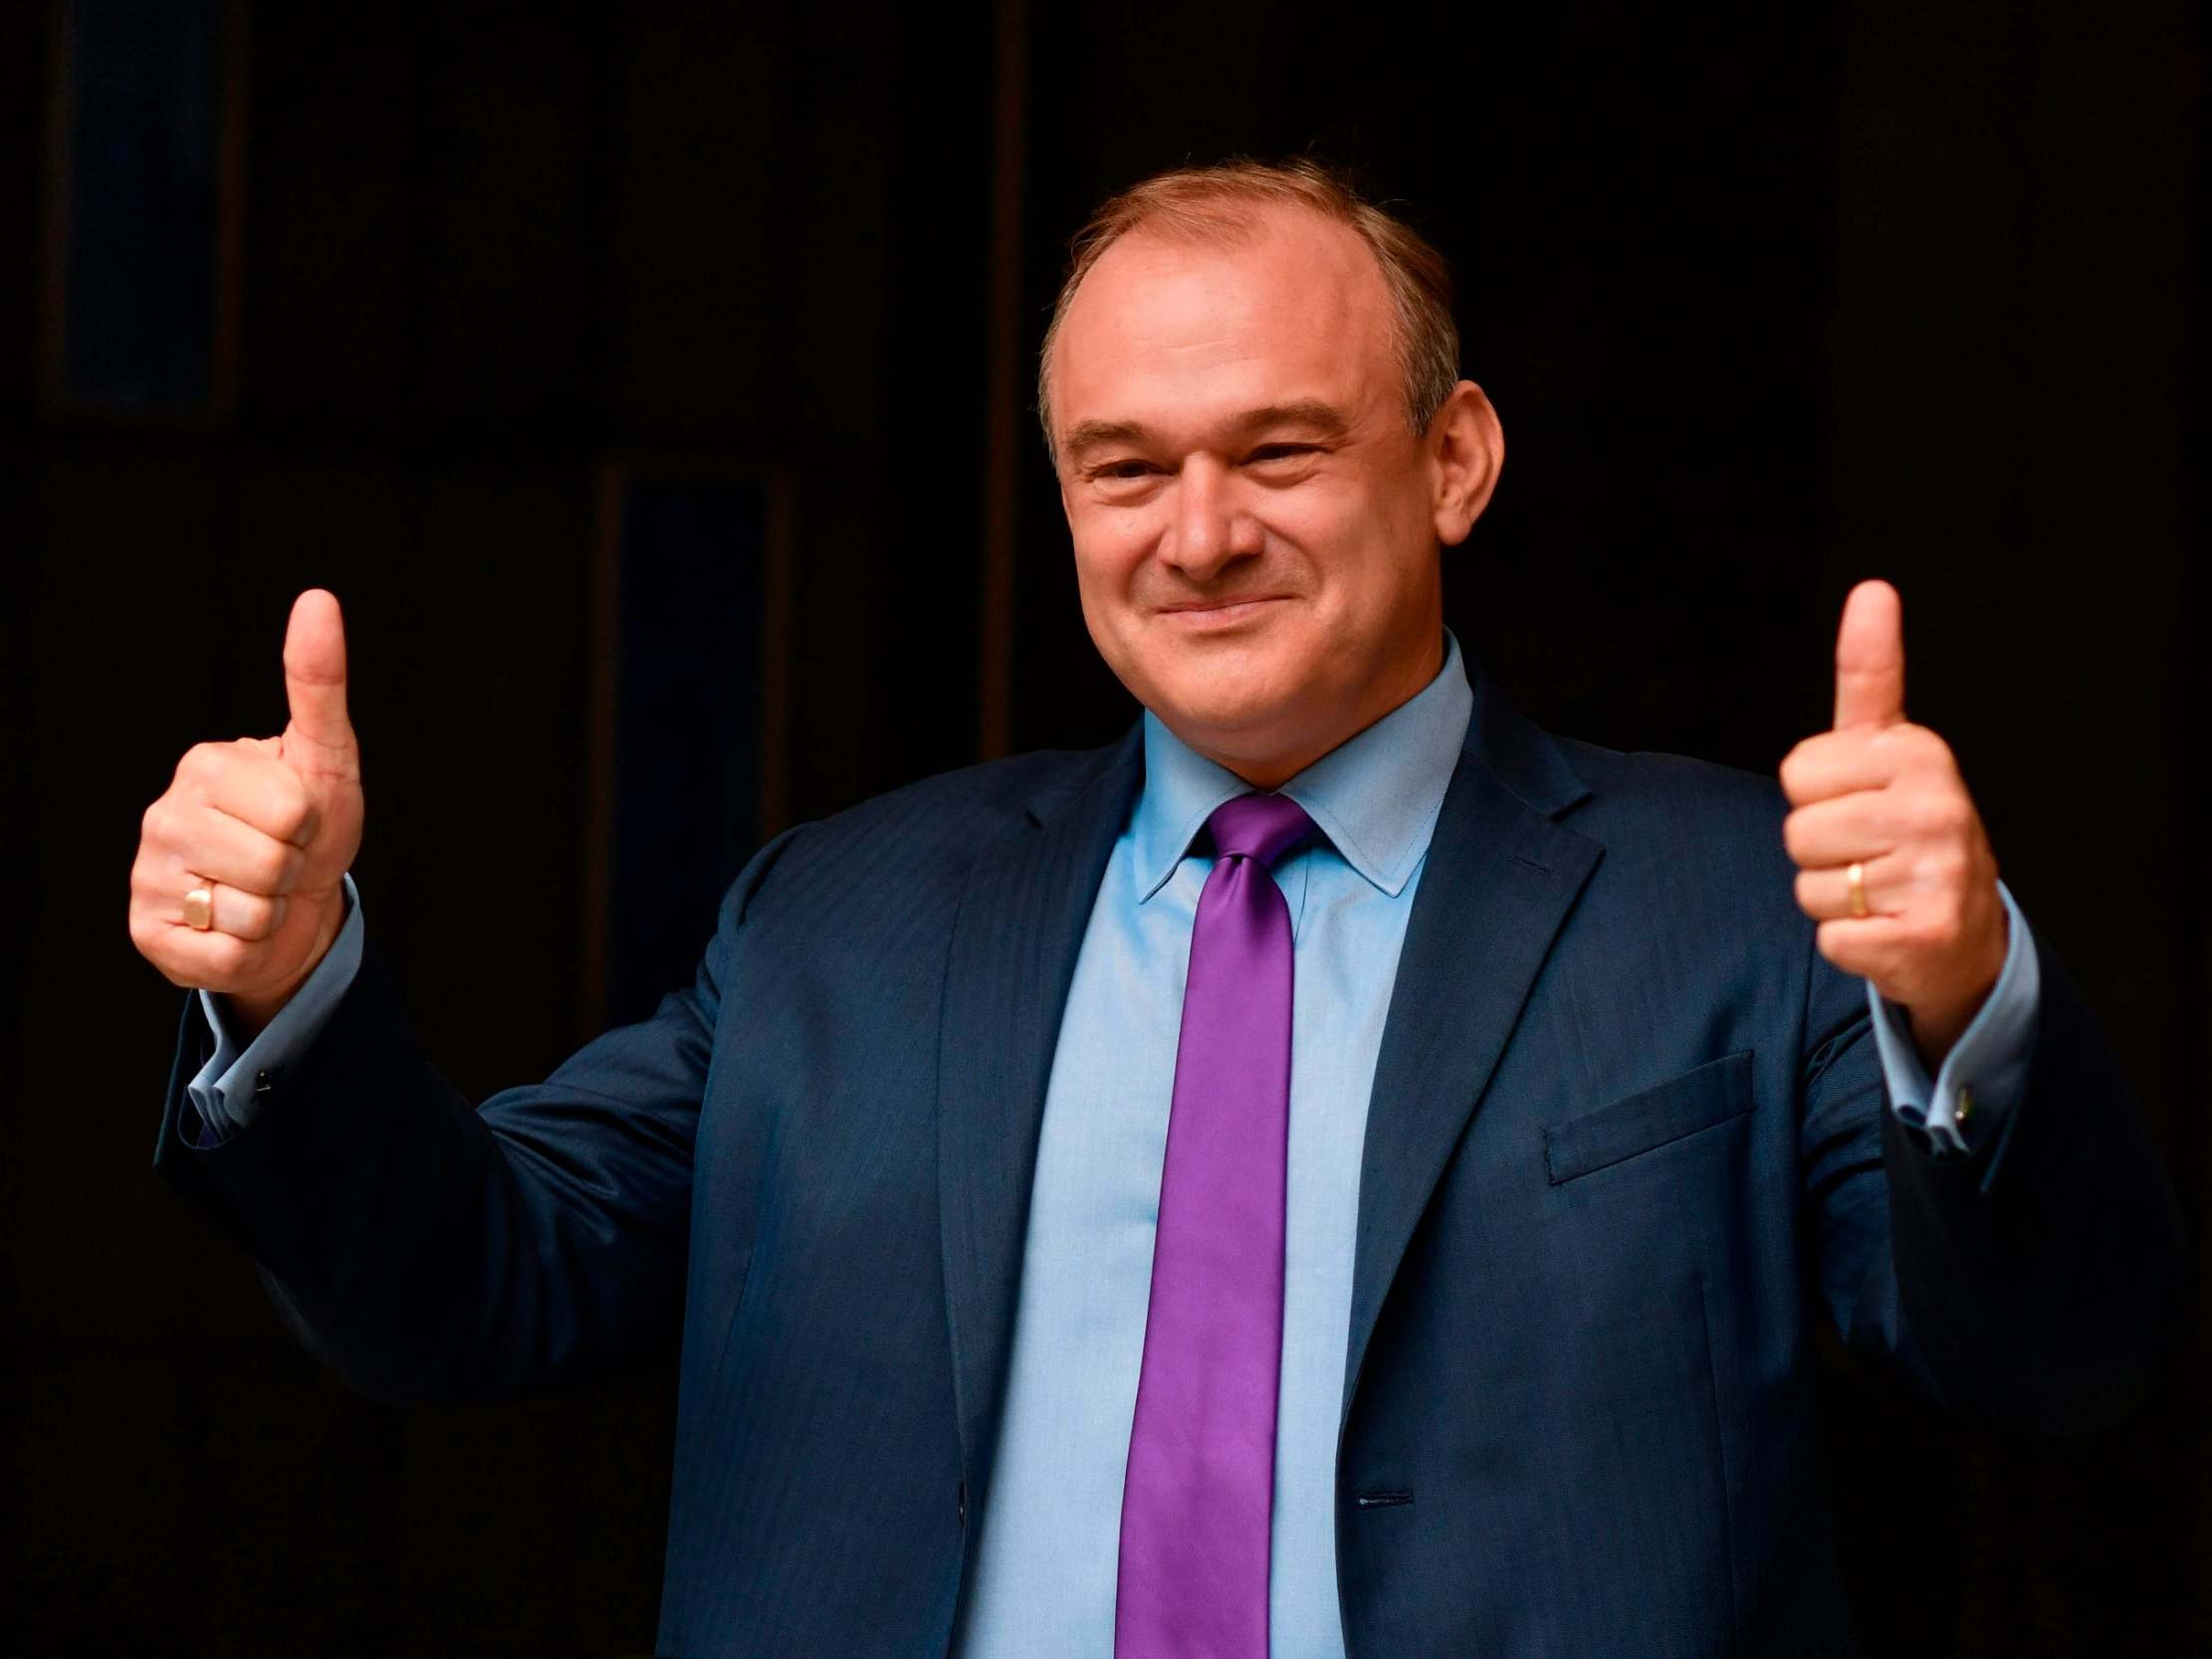 'They want to divide and rule': Sir Ed Davey vows not to allow government to turn British politics into 'culture war'